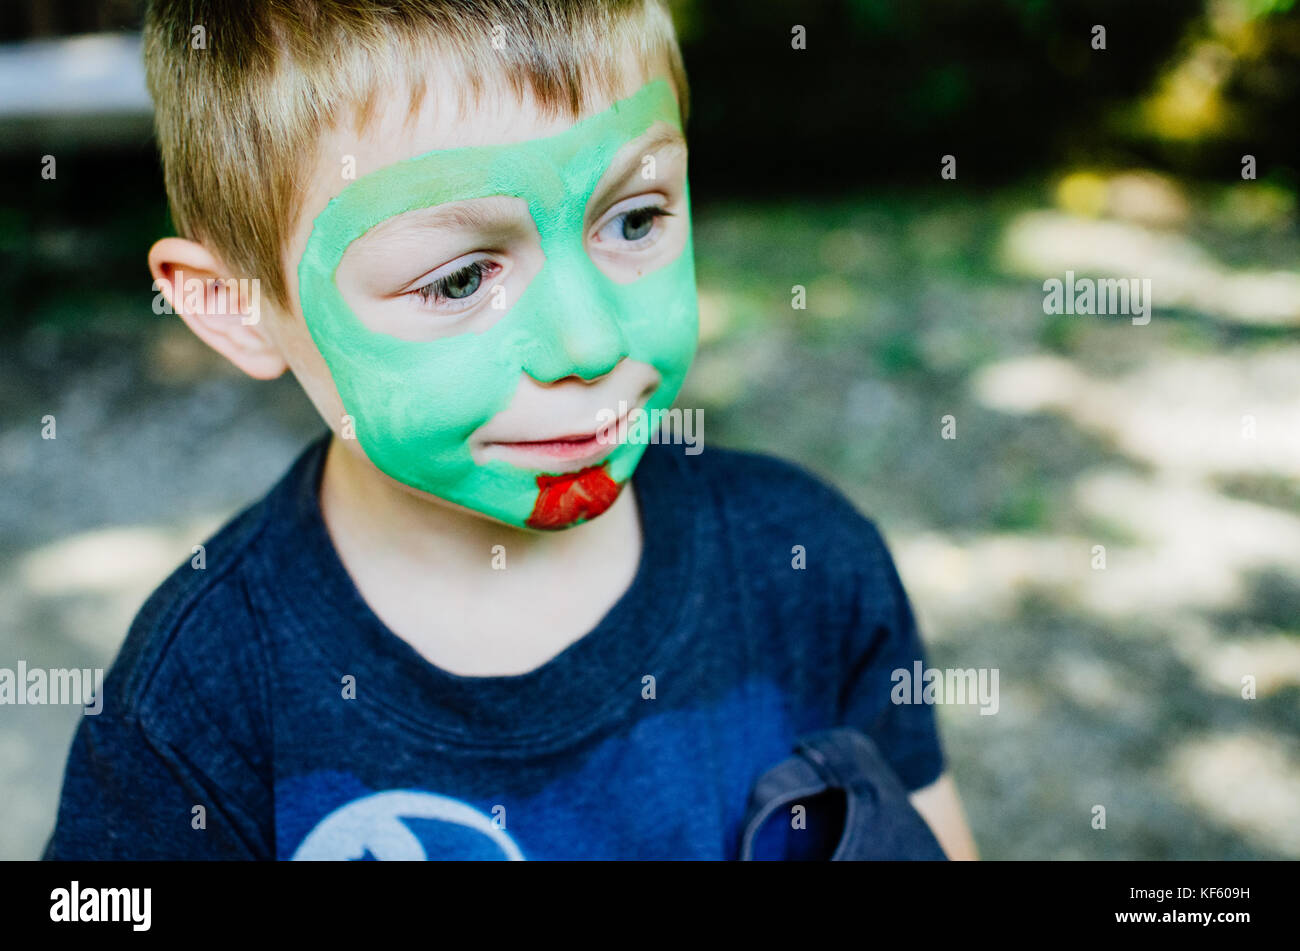 A boy with green face paint being painted Stock Photo